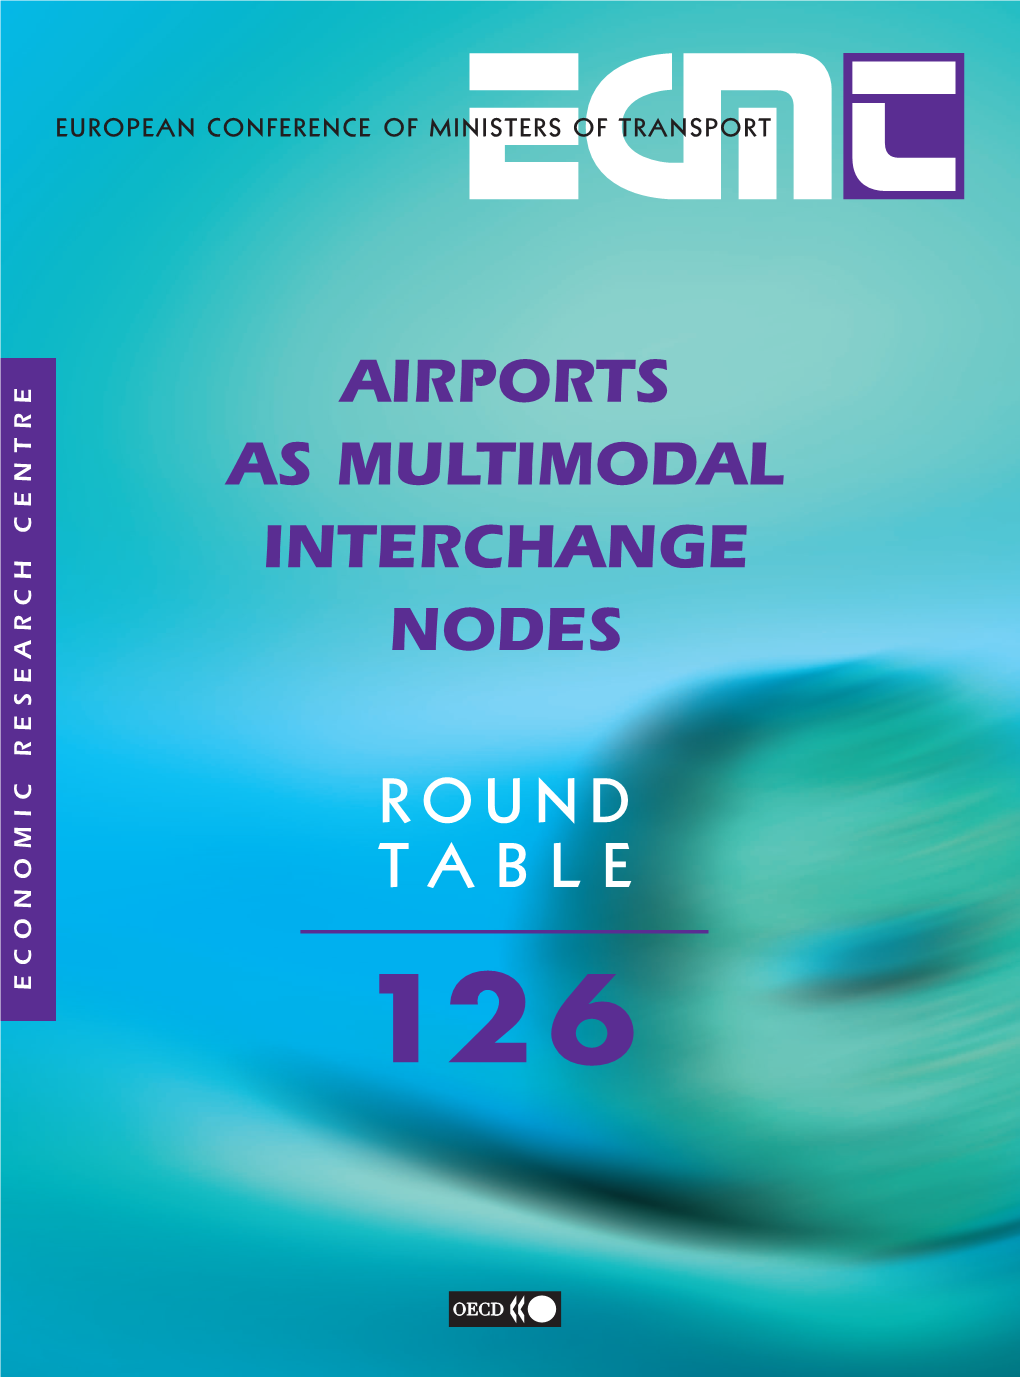 No. 126 Airports As Multimodal Interchange Nodes ISBN: 92-821-0339-0 OECD Code (Printed Version): 75 2005 03 1 * Please Note: This Offer Is Not Open to OECD Staff